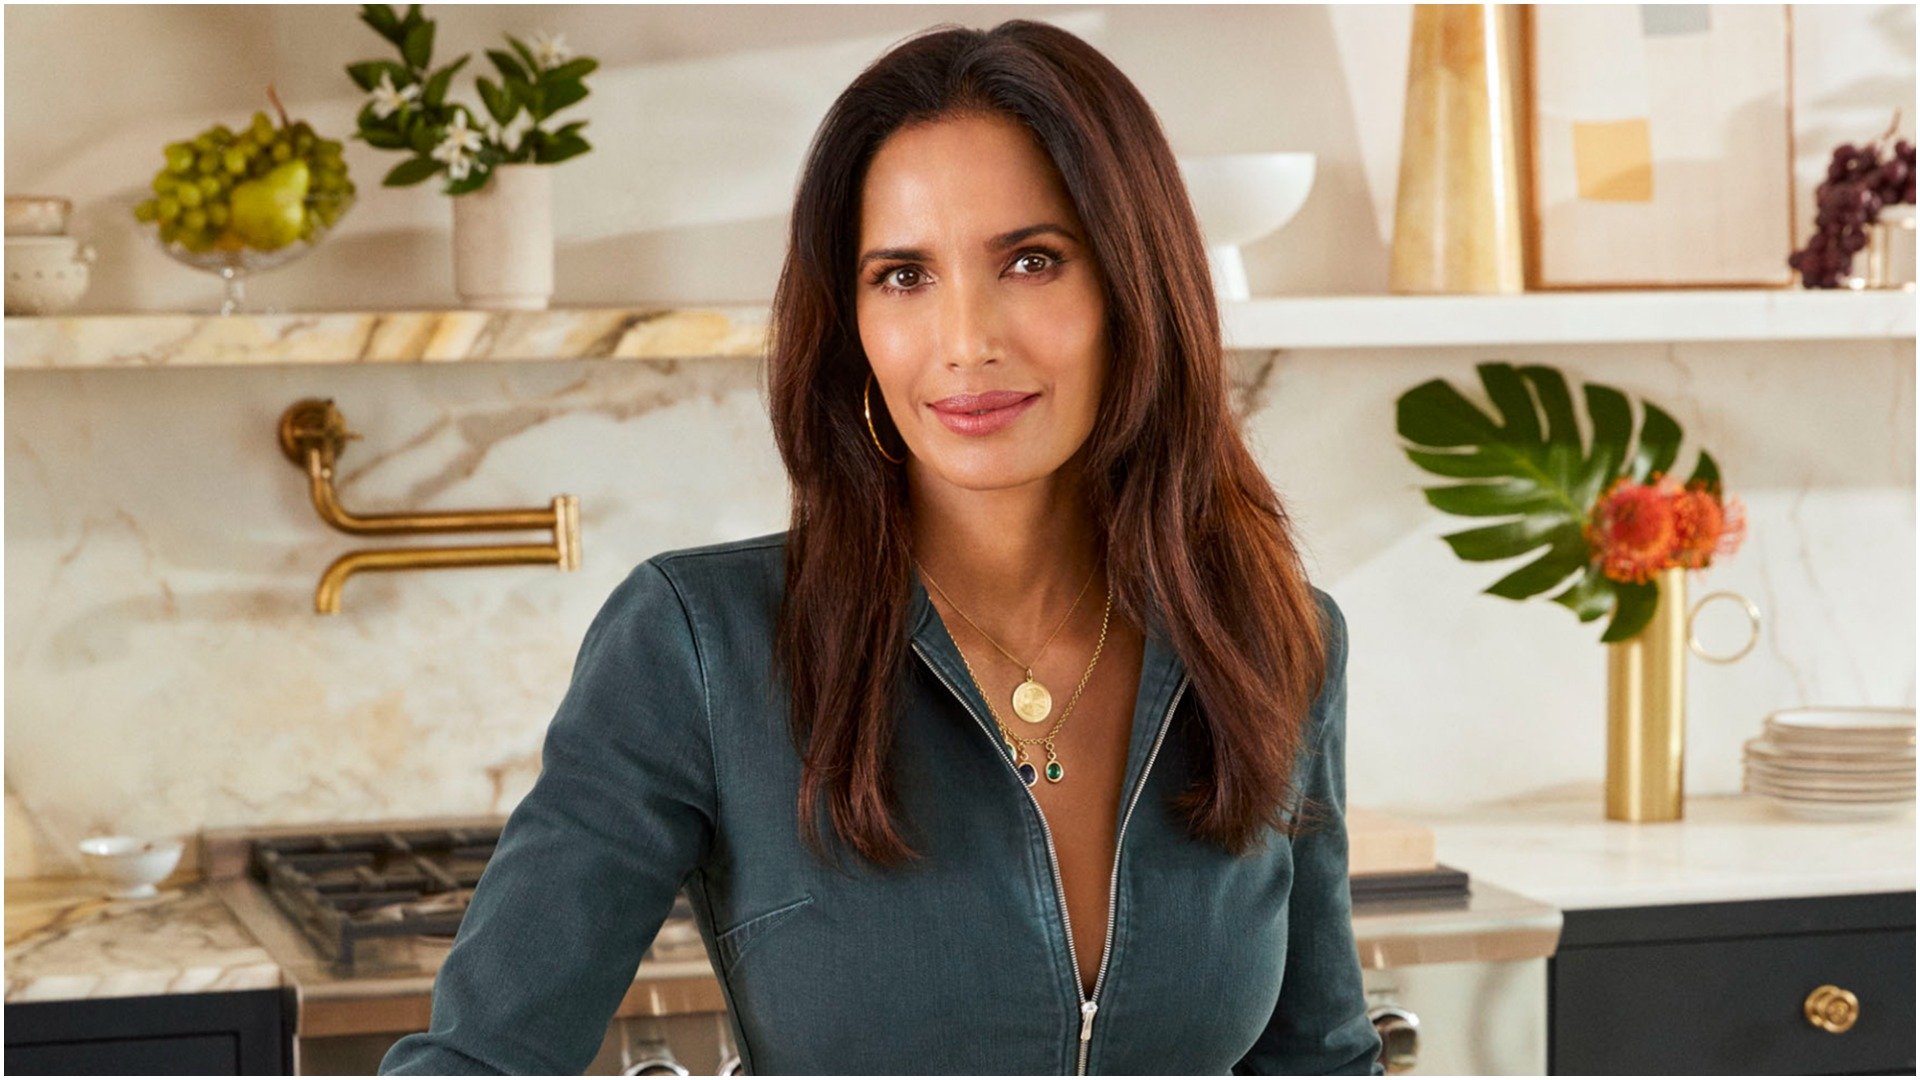 Padma Lakshmi from 'Top Chef' smiles while in her kitchen 